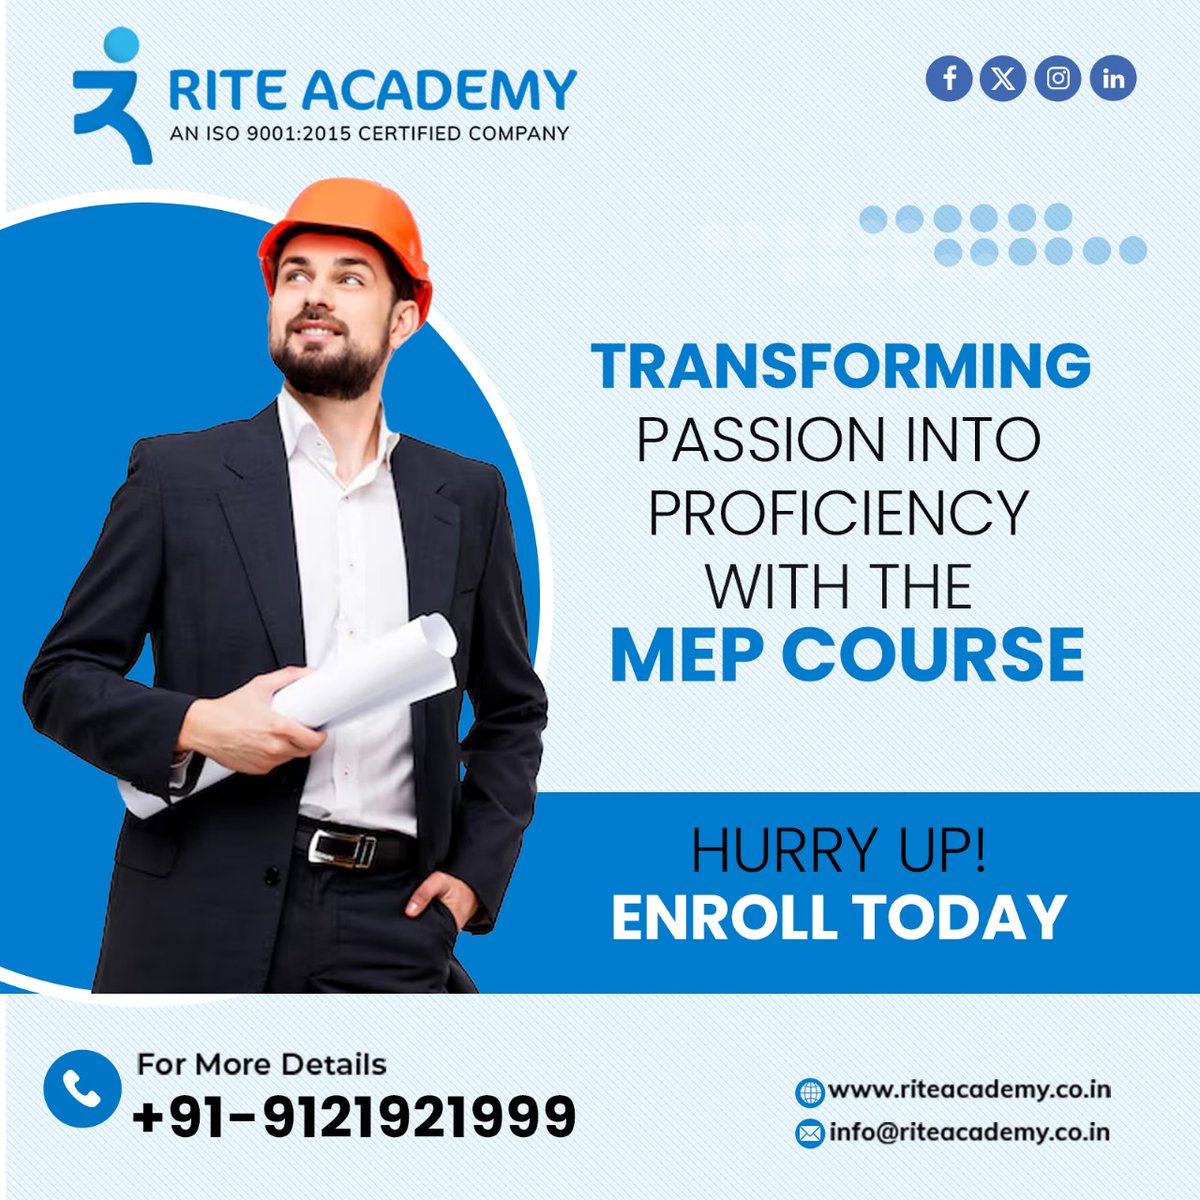 Don't just dream it, do it! Transform your passion into proficiency with our Rite Academy #MEP course in #Hyderabad. 🛠️🎓

Enroll in our #MEPcourse and become a certified expert! 📚👷‍♂️

#mepcourse #riteacademy #meptrainingindia  #meptraining #meptechnician #trainingfromexperts